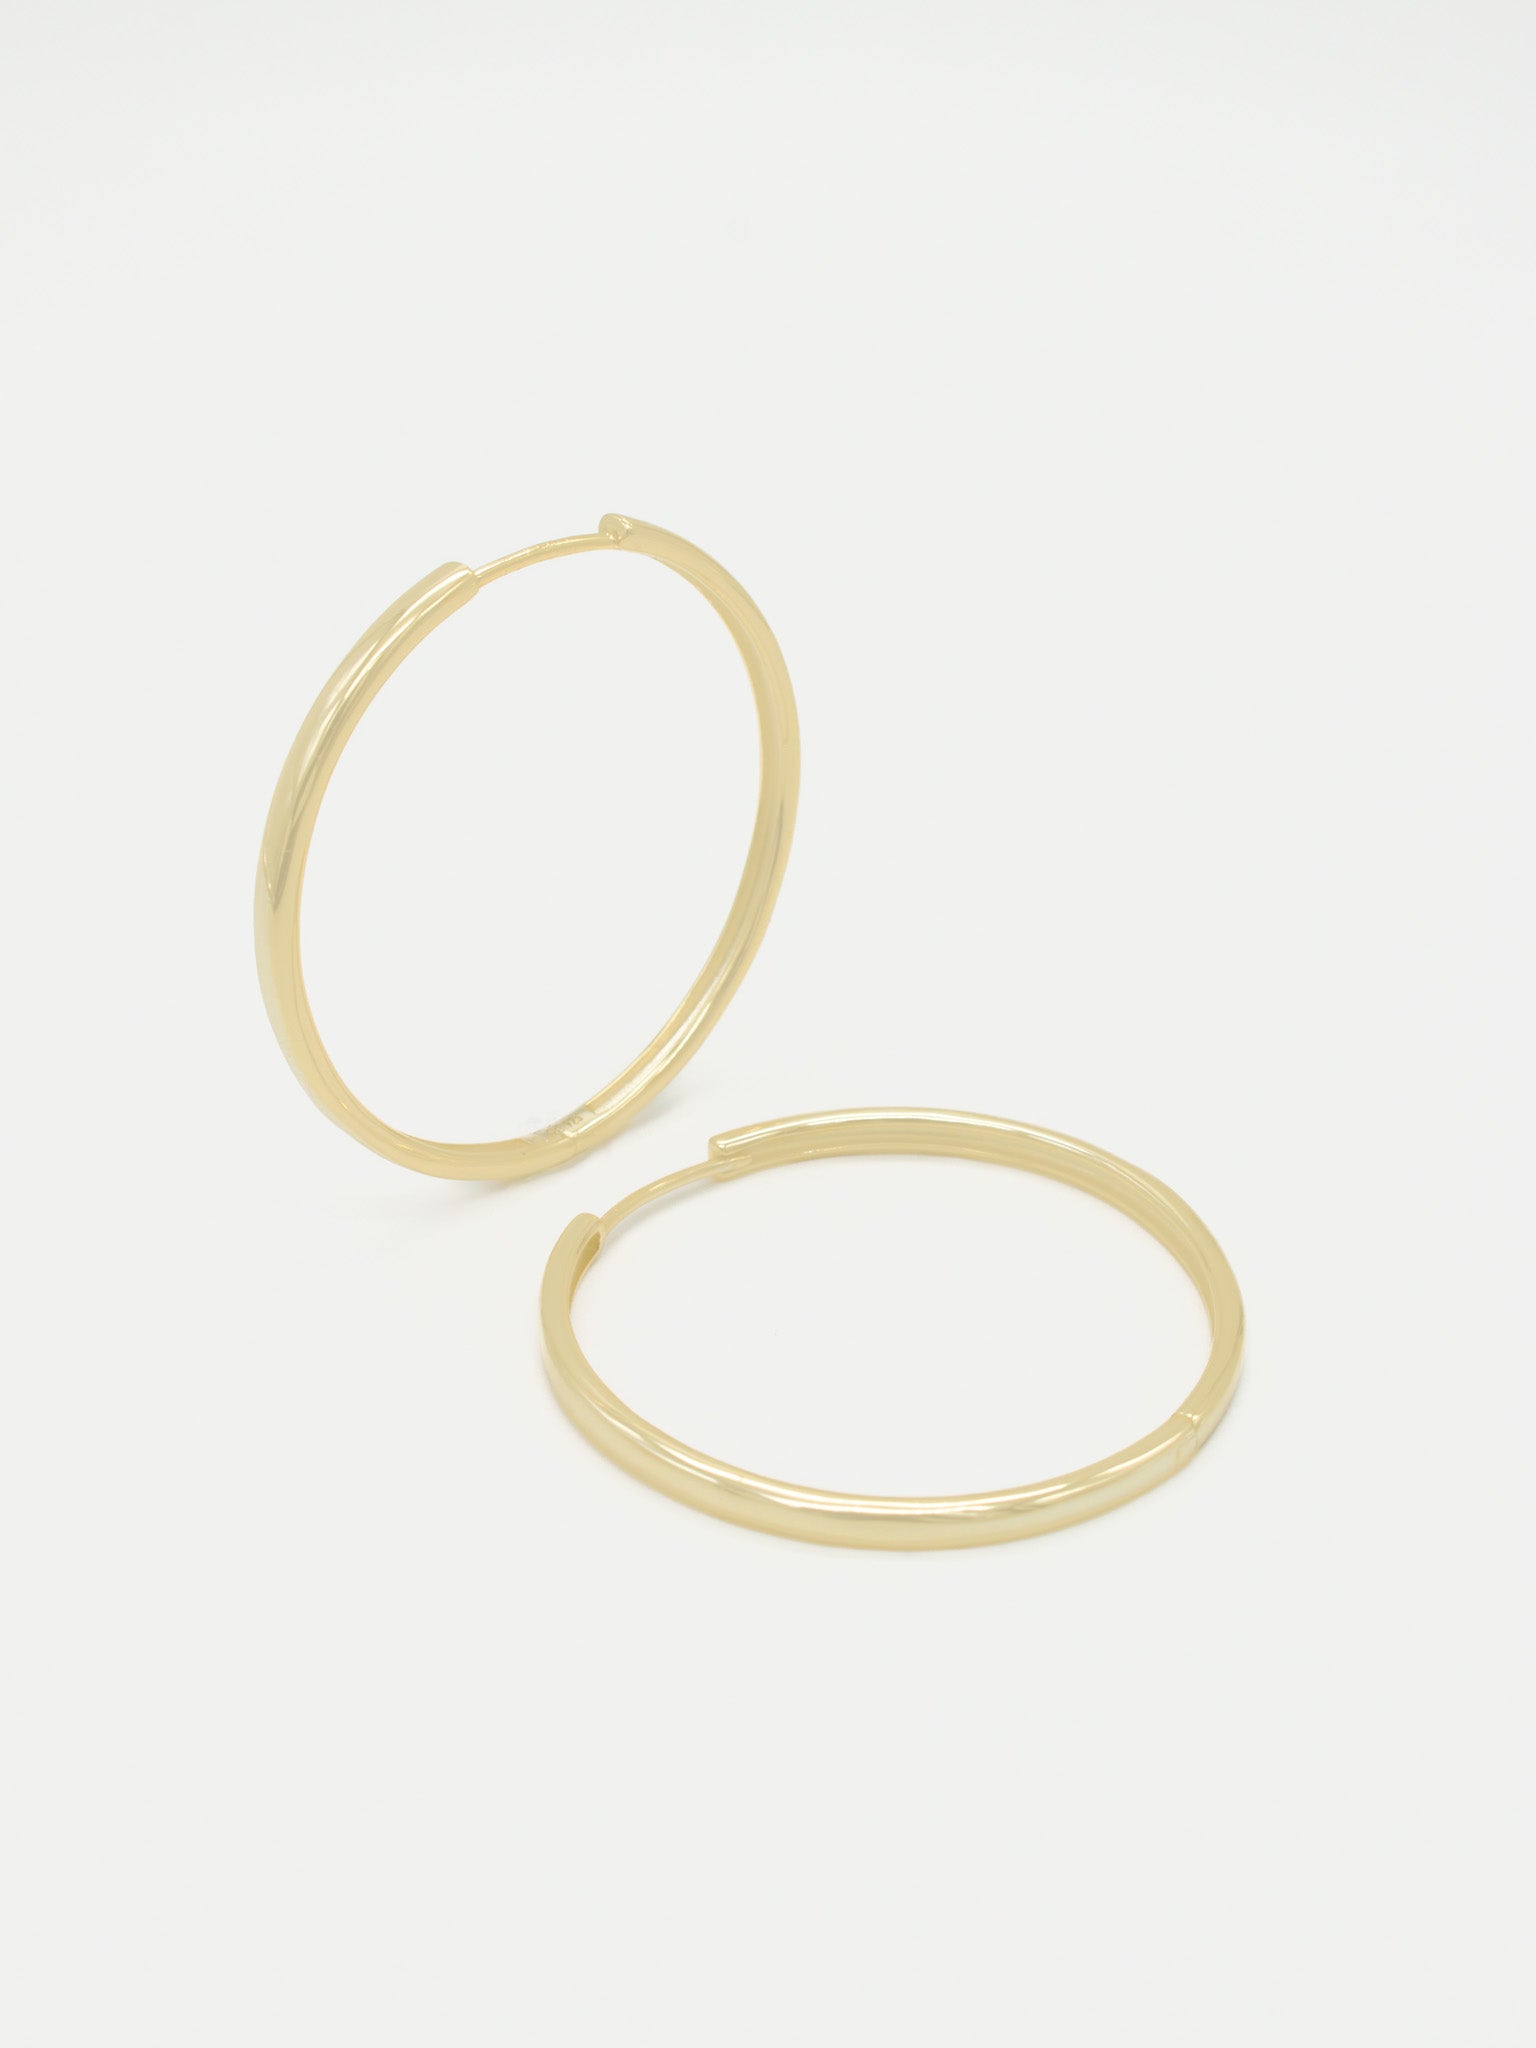 Perfect Hoops (XL) Gold